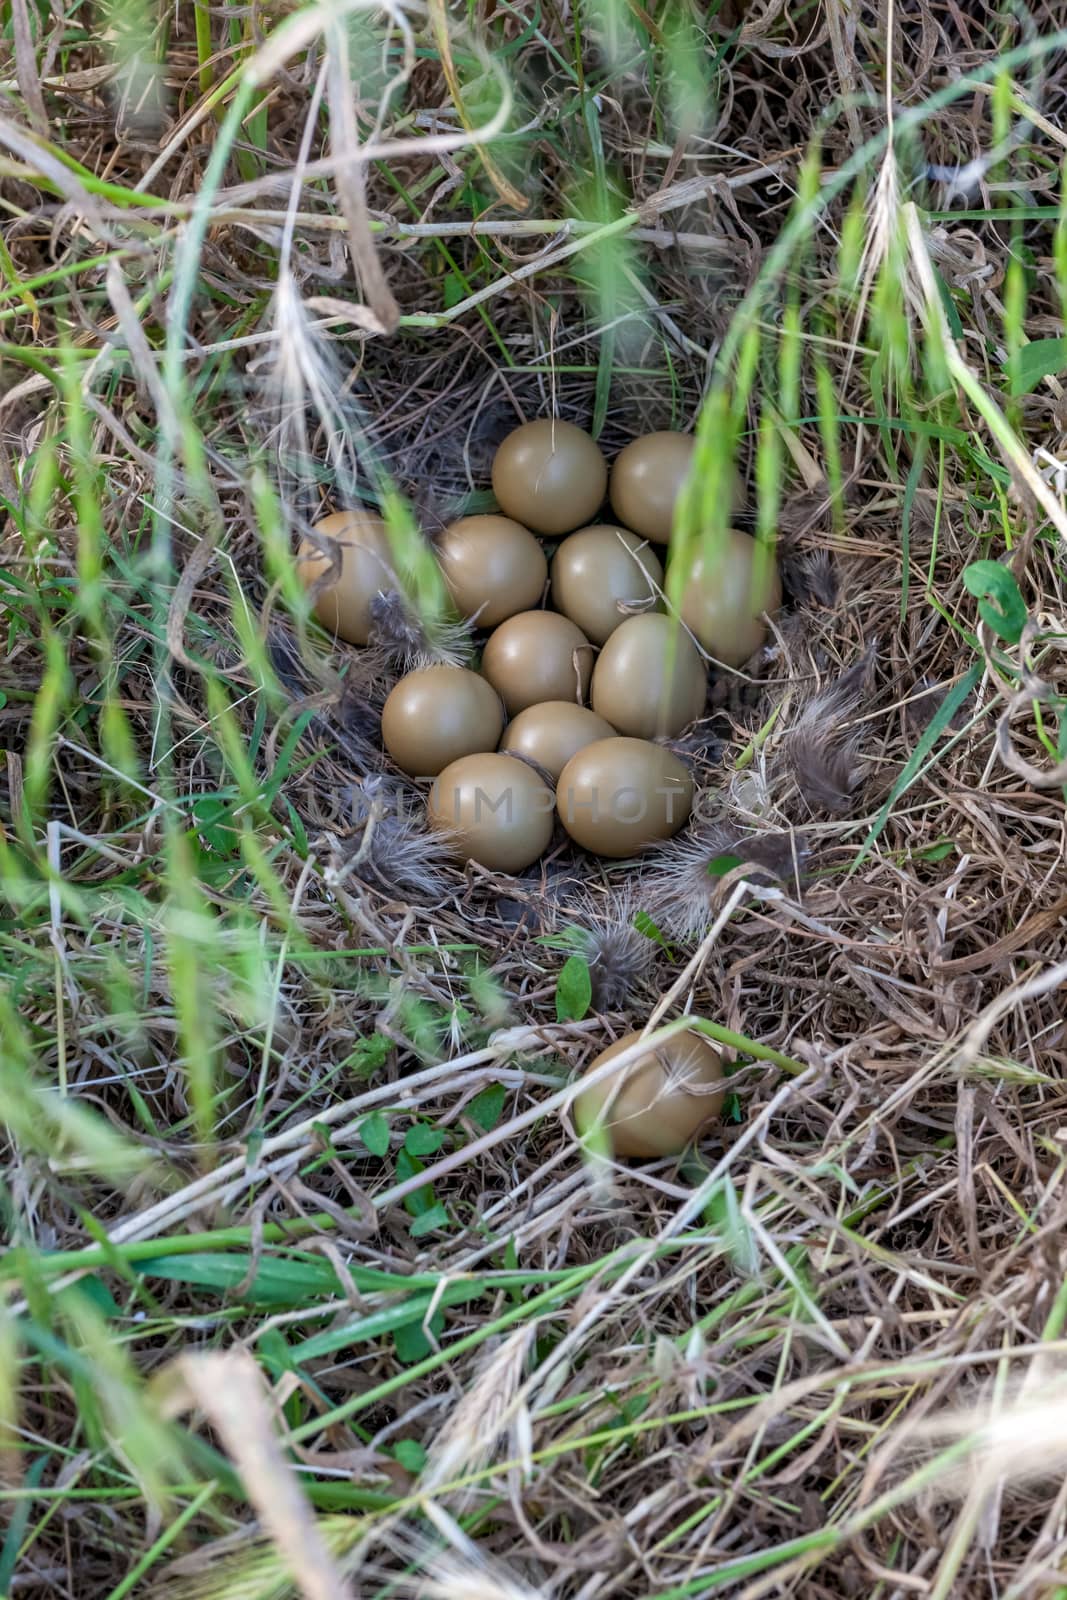 Pheasant nest in the green grass. Tuscany, Italy